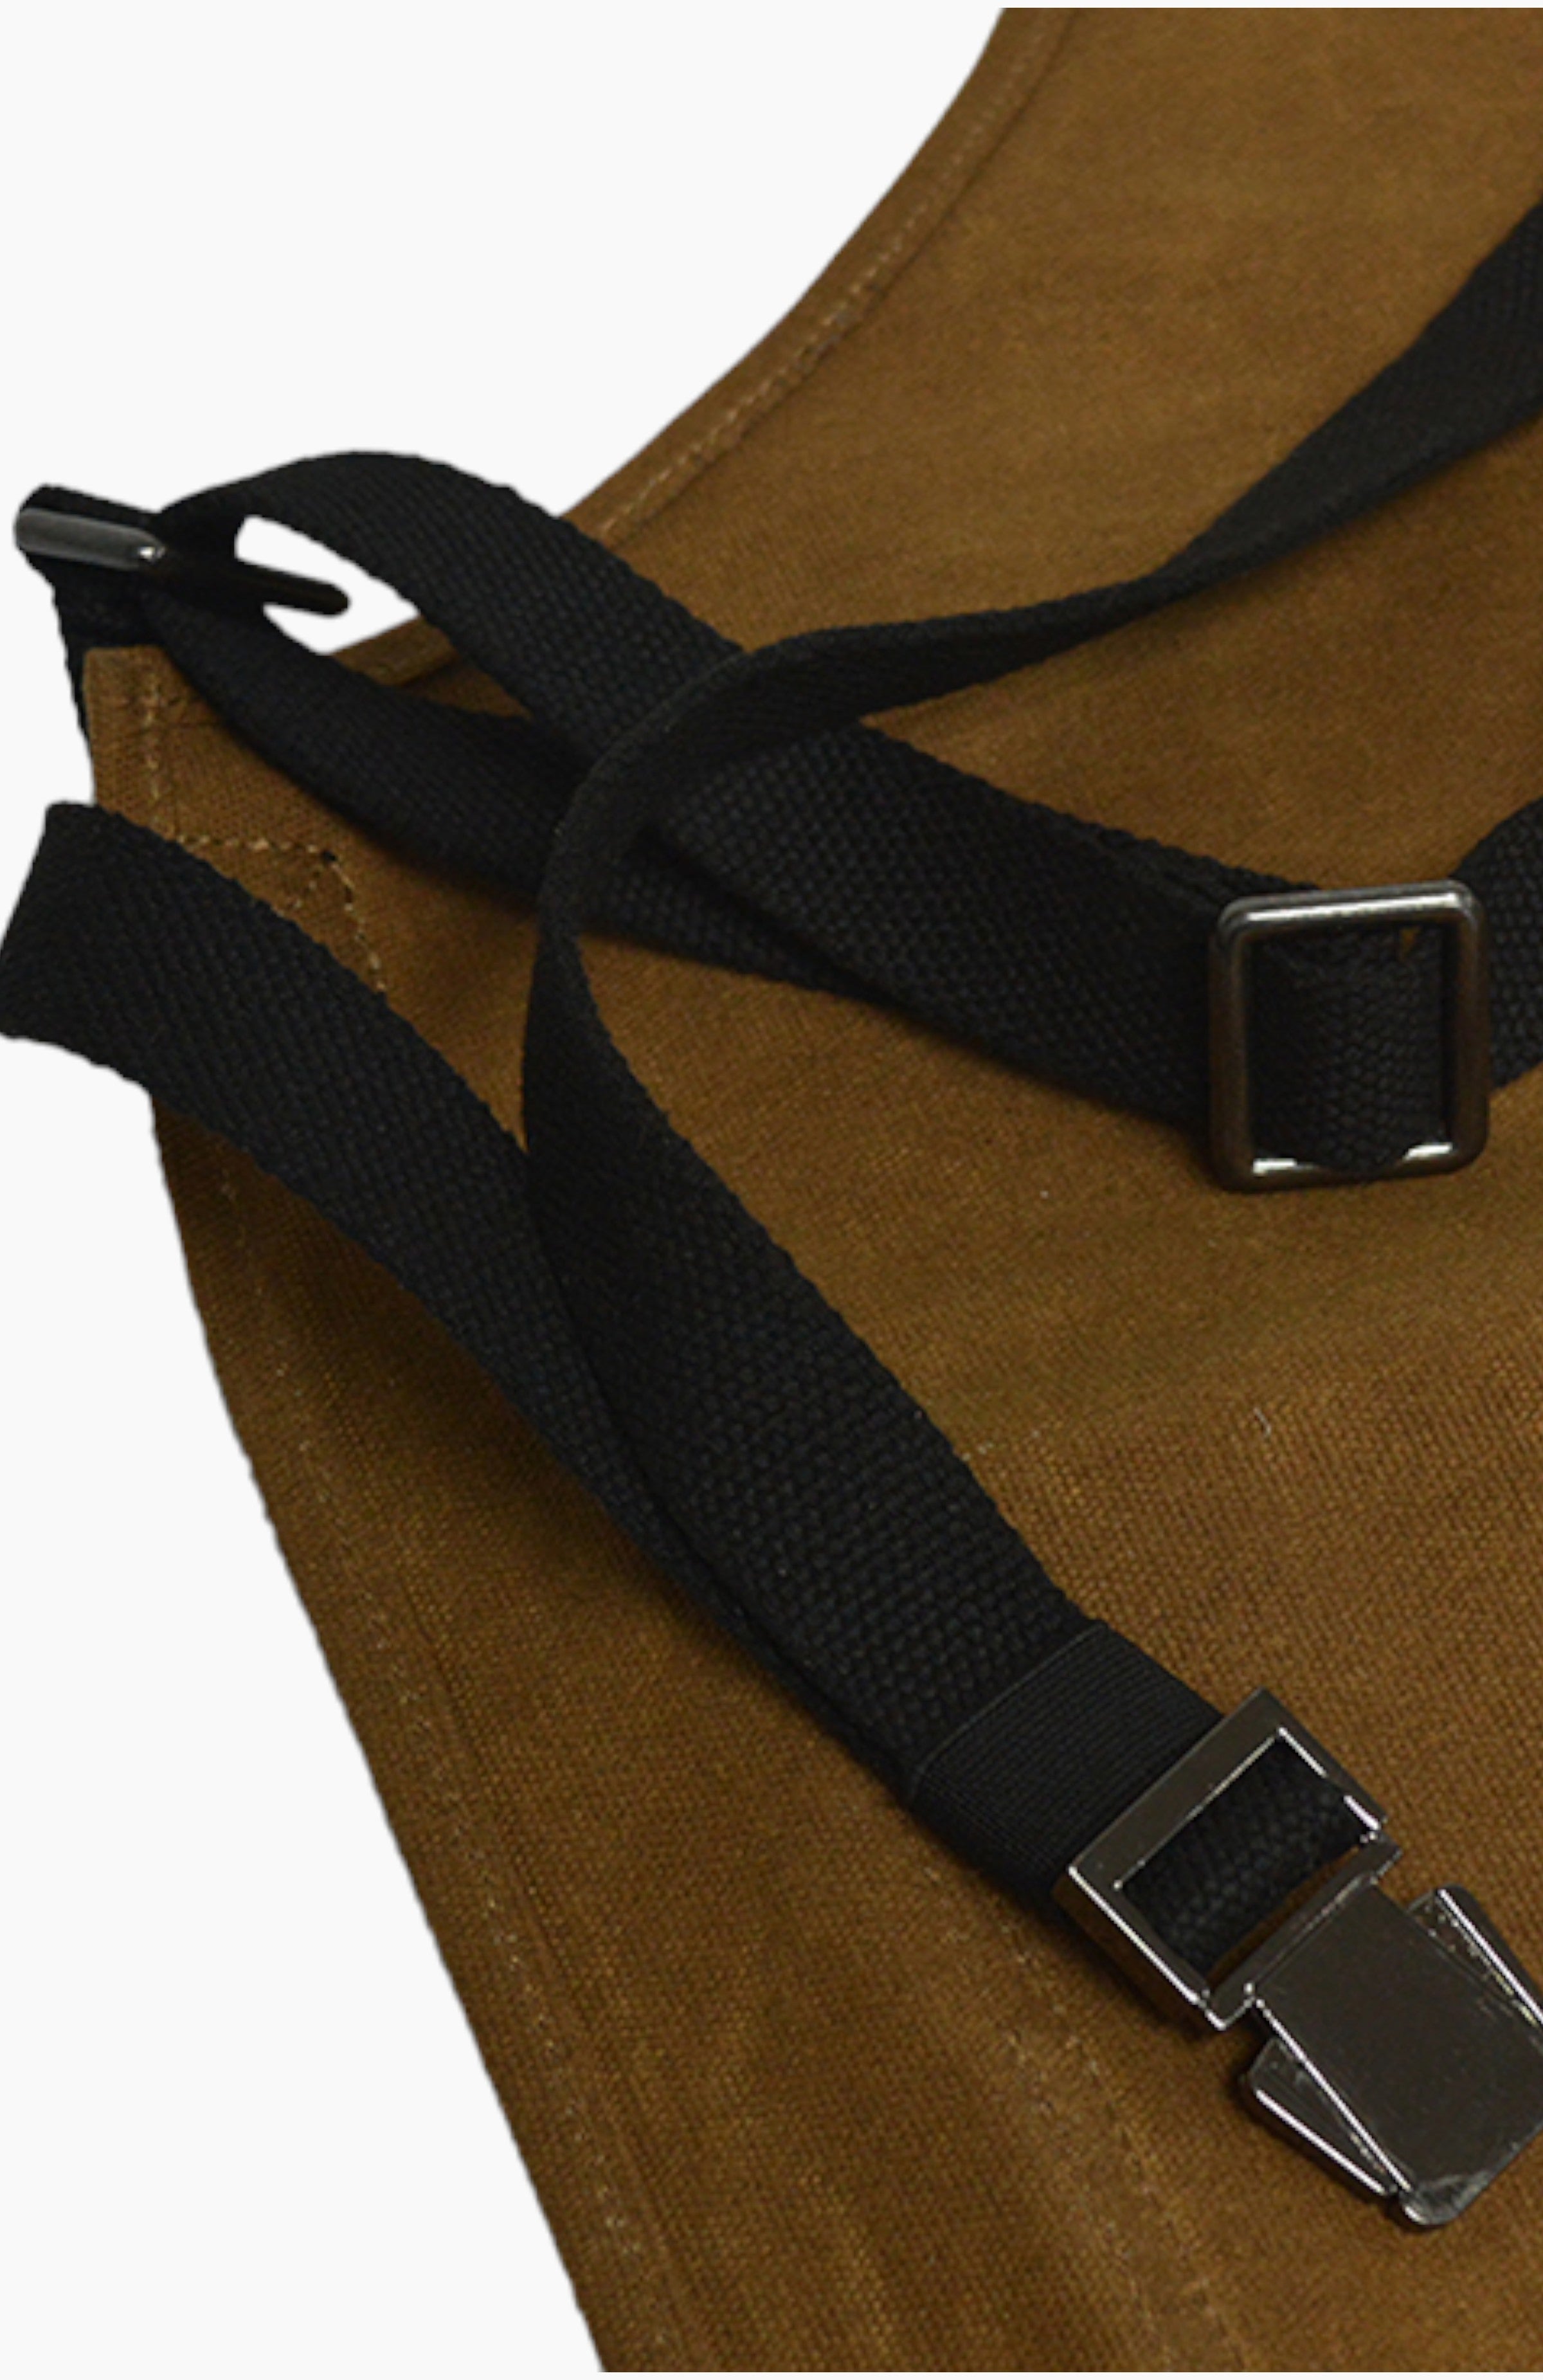 Close up of black straps and metal clasps on a brown leather apron.